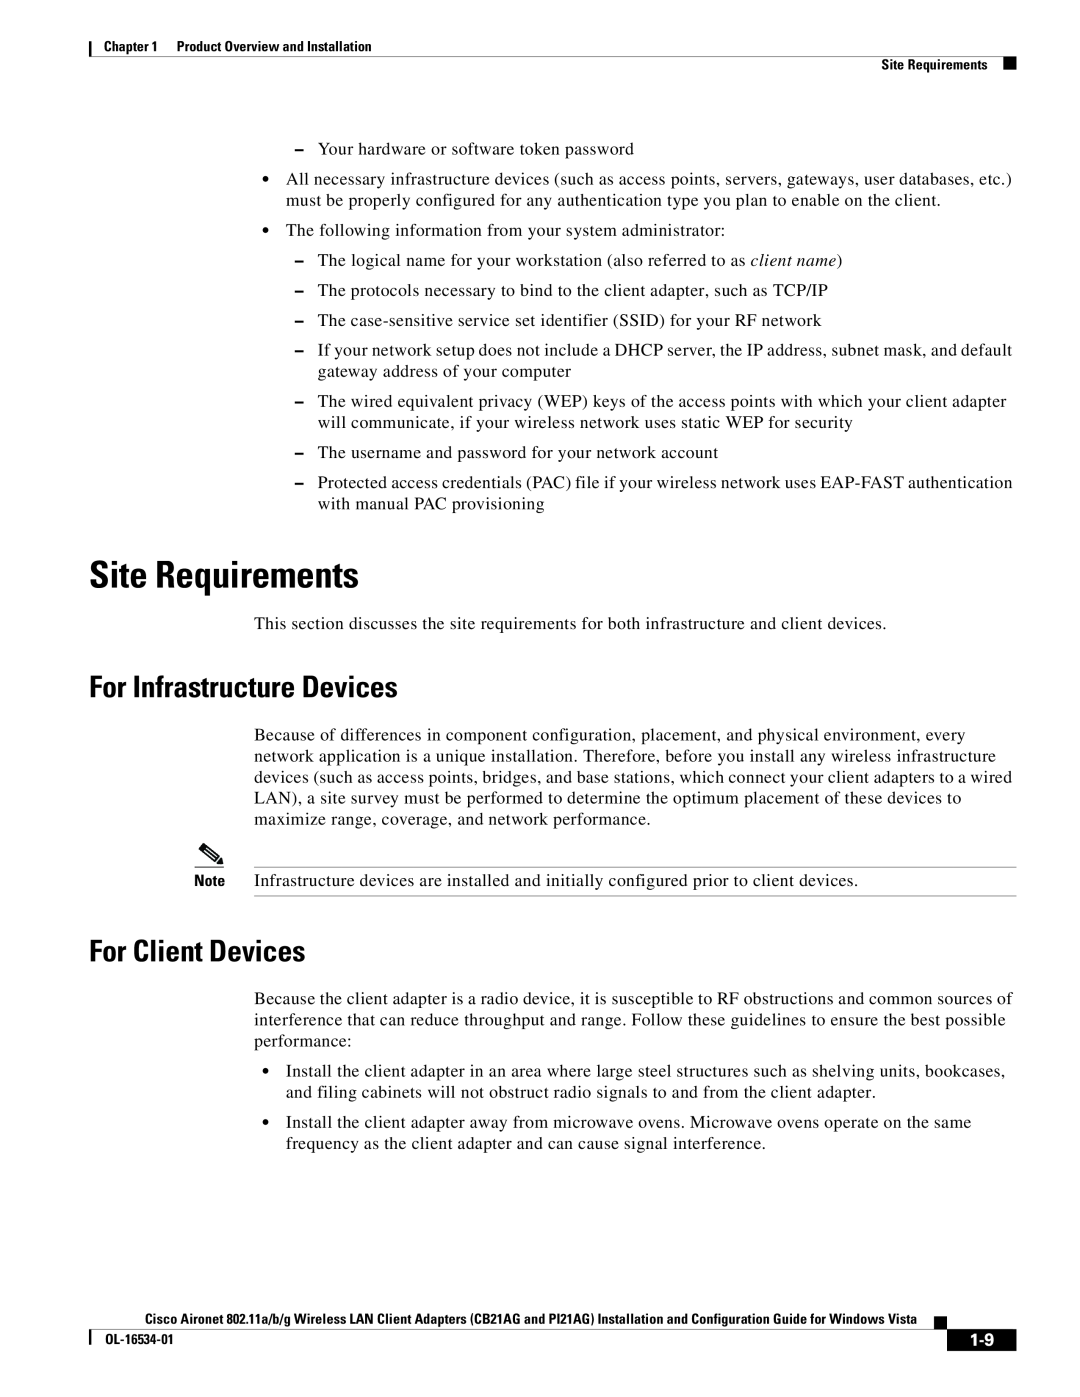 Cisco Systems CB21AG, PI21AG manual Site Requirements, For Infrastructure Devices, For Client Devices 